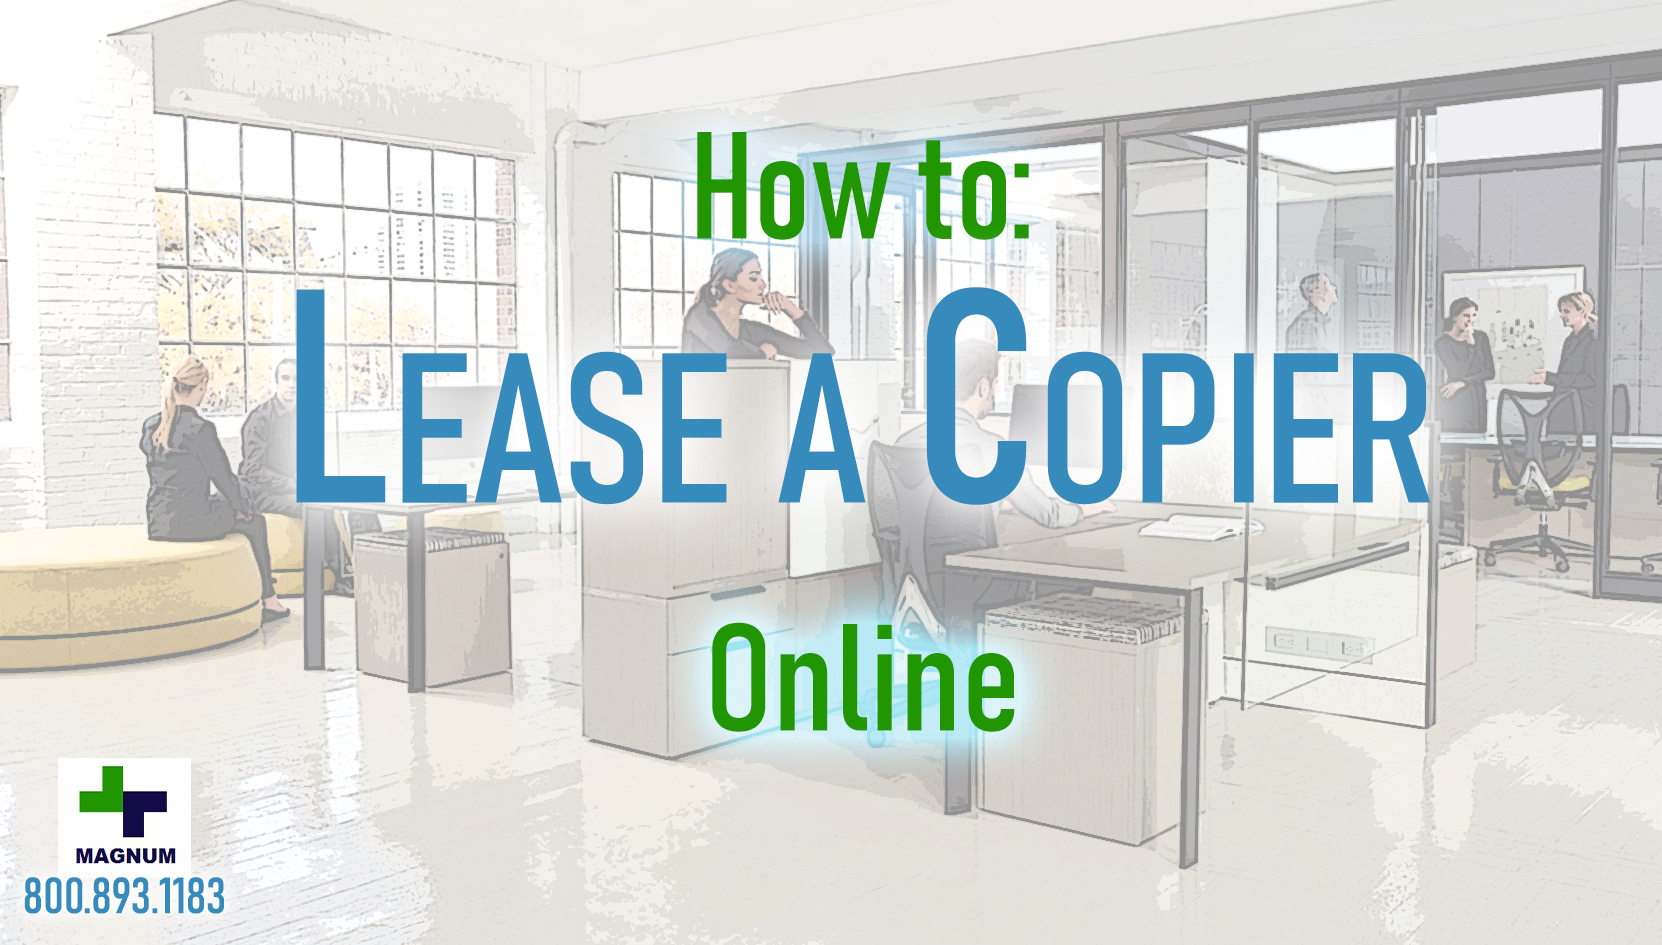 How to Lease a Copier Online